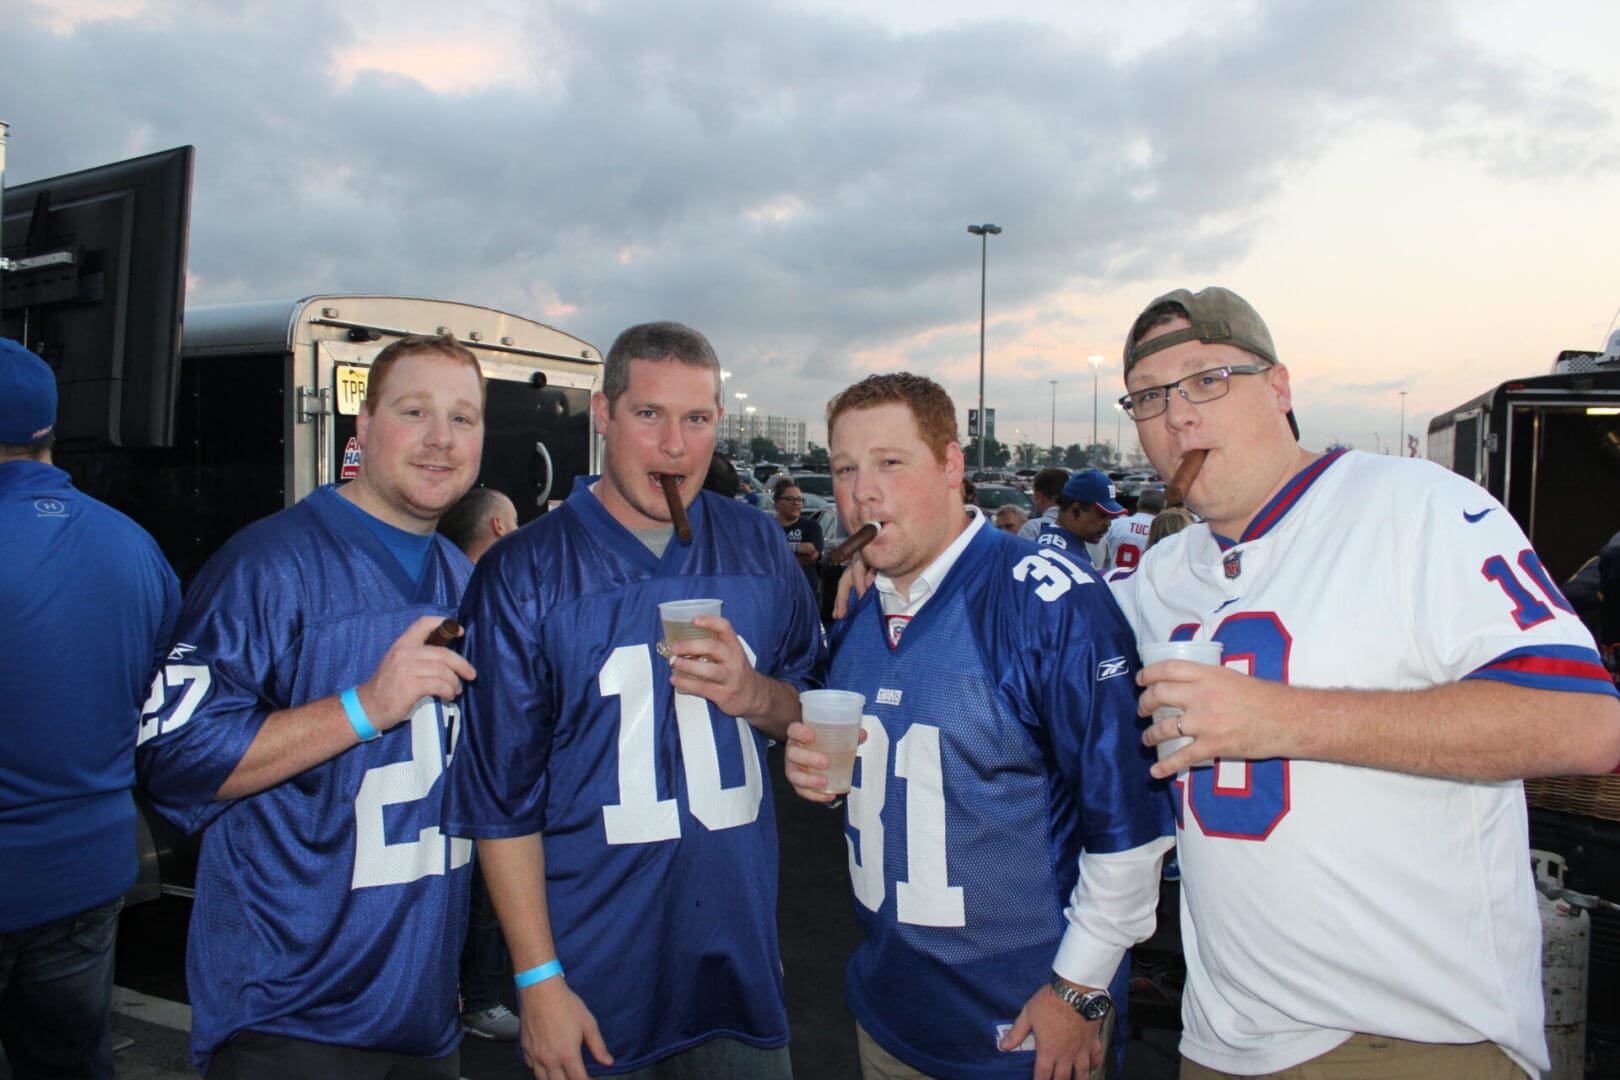 A group of men in football jerseys drinking beer.